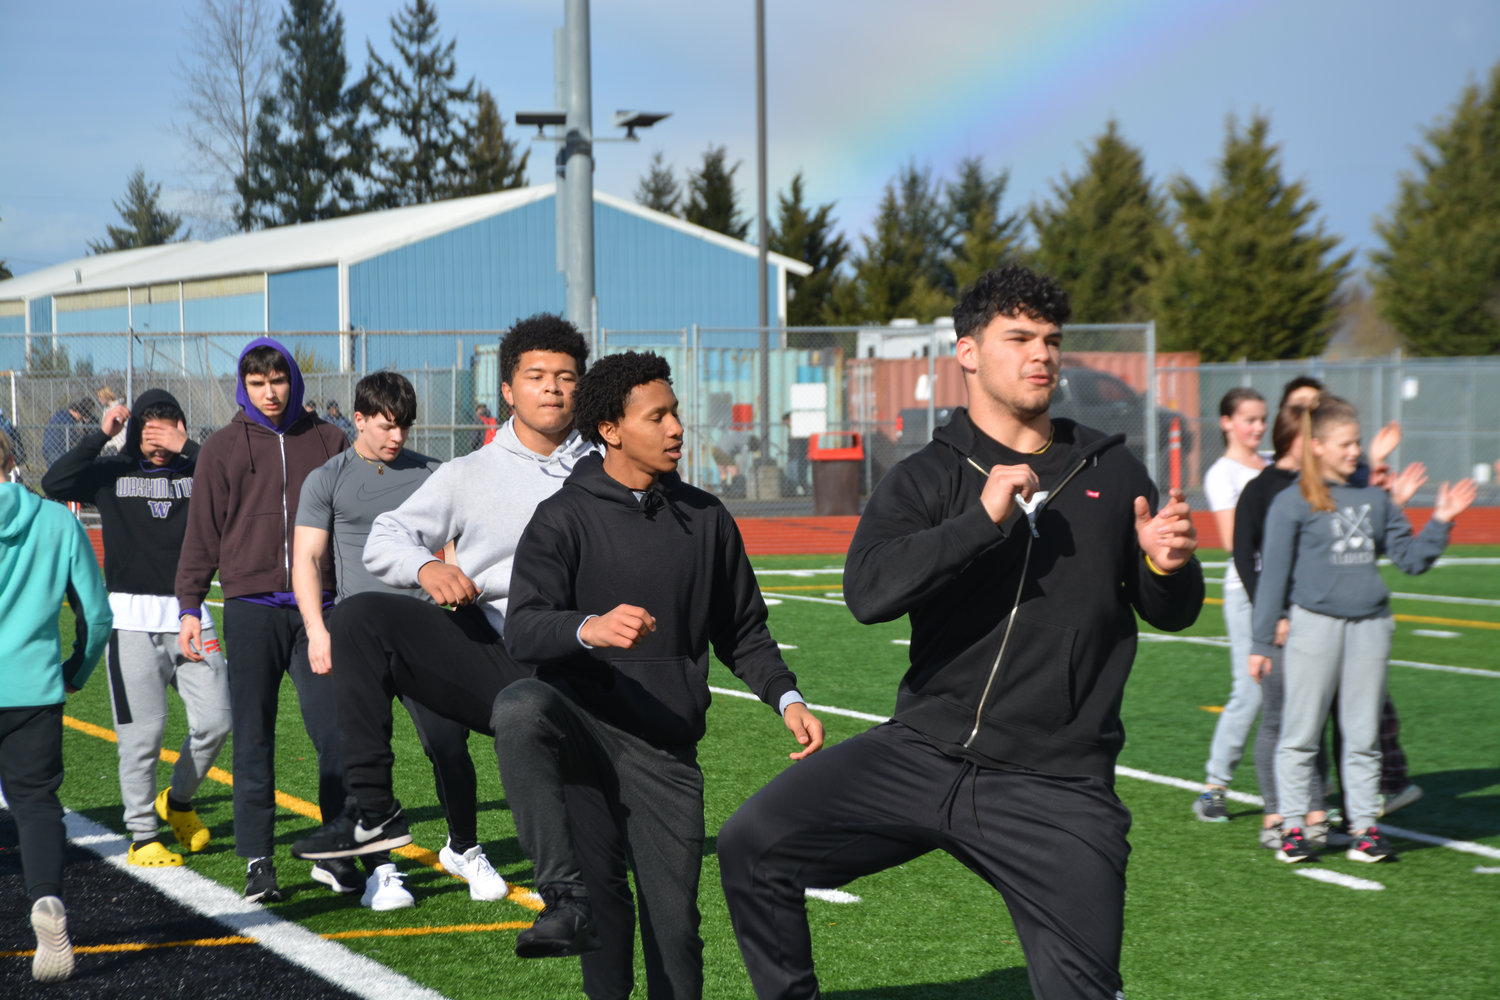 Yelm track athletes warm up on Friday, March 10.